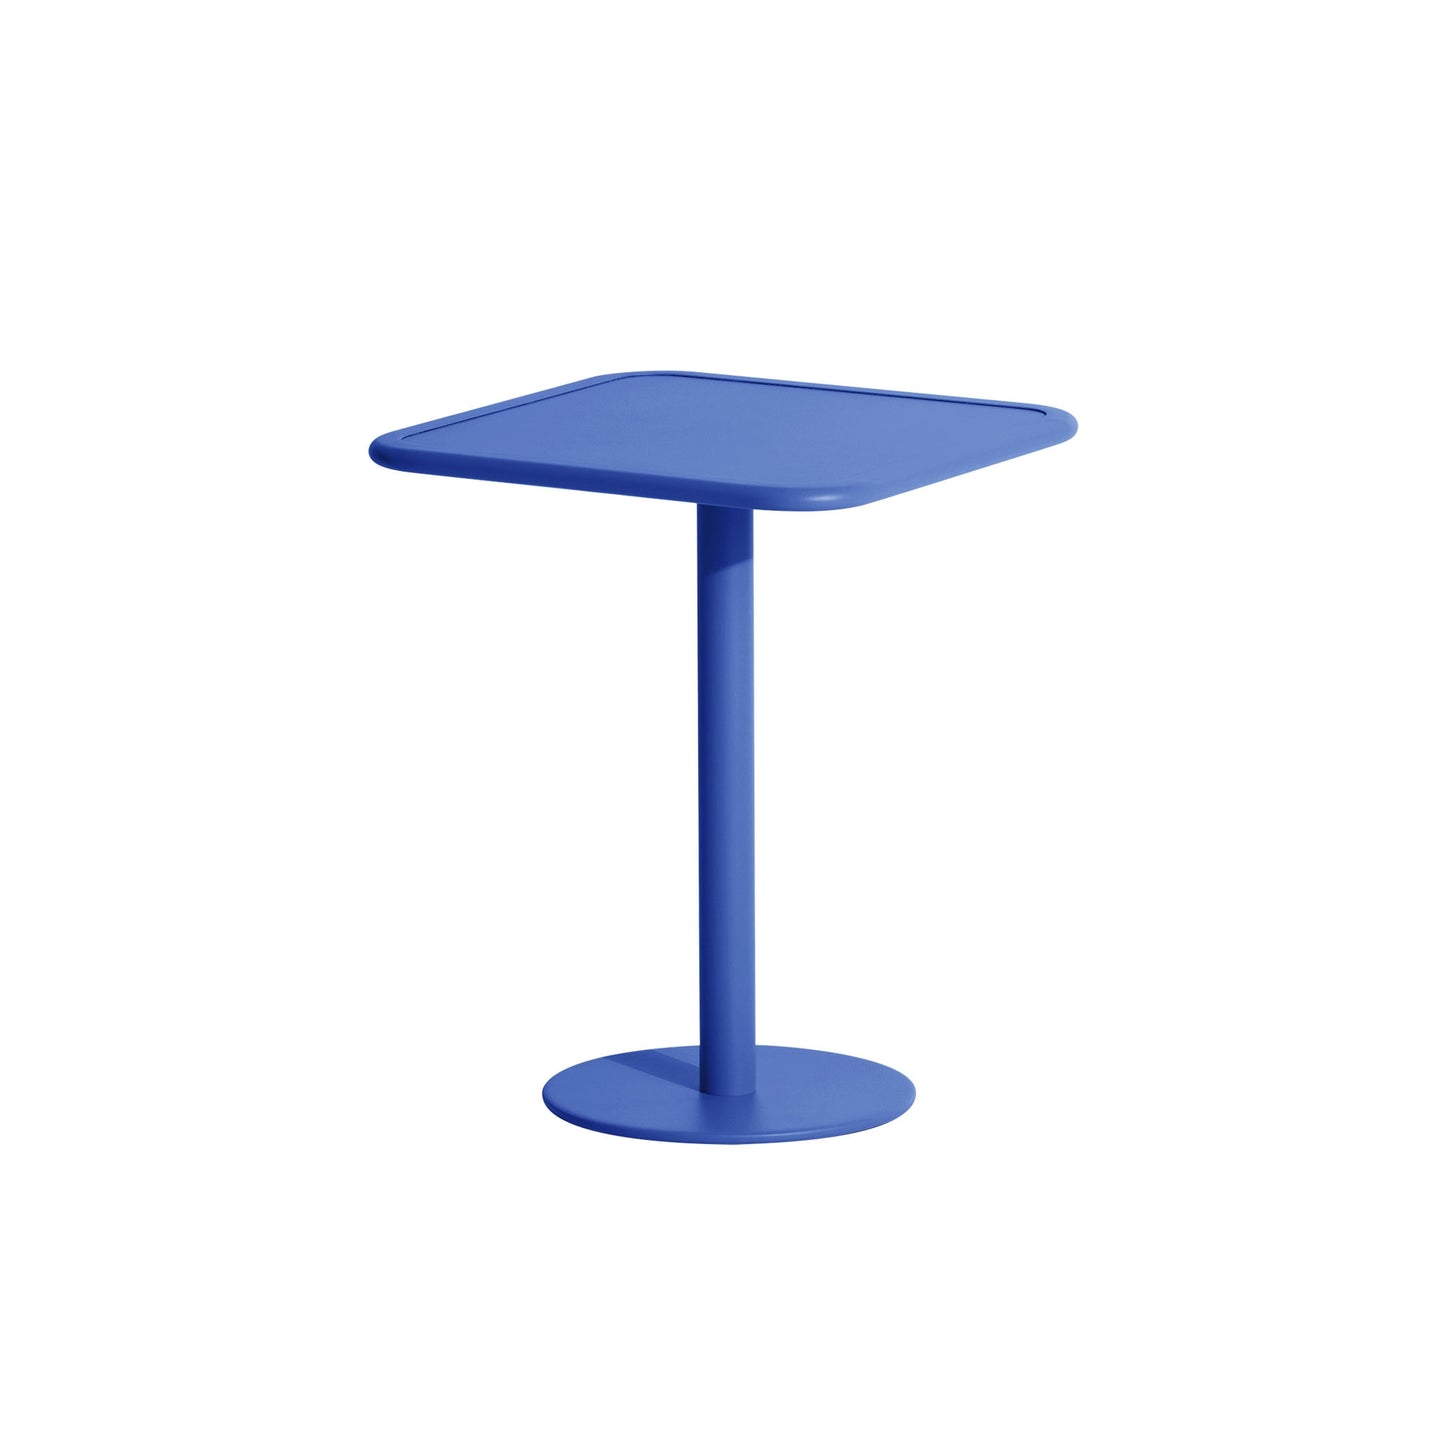 WEEK-END Square Café Table by Petite Friture #Blue